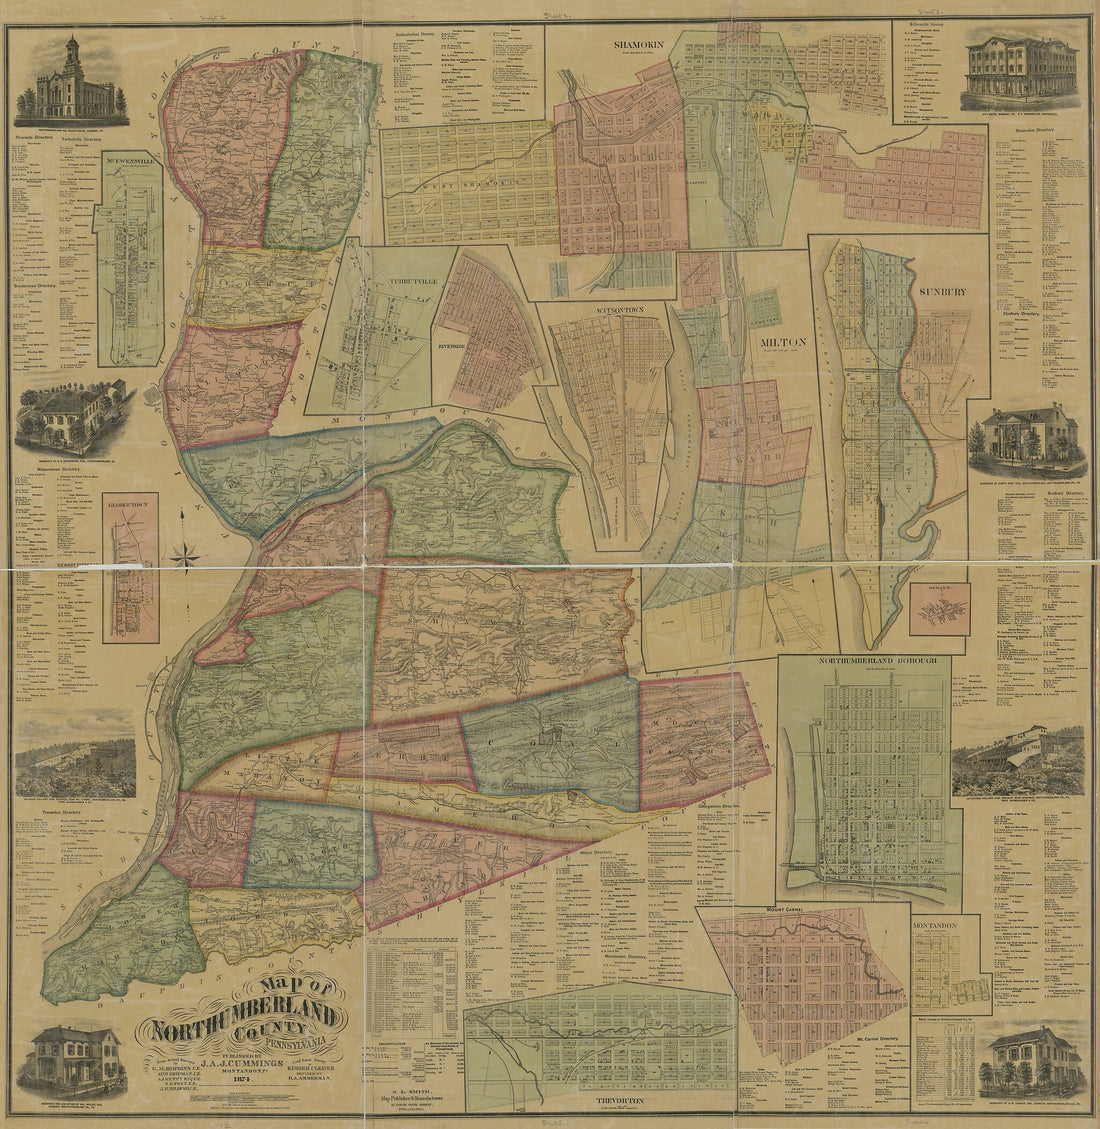 This old map of Map of Northumberland County, Pennsylvania : from Actual Surveys from 1874 was created by R. A. Ammerman, Kimber Cleaver, J. A. J. Cummings, Griffith Morgan Hopkins, John L. Smith in 1874